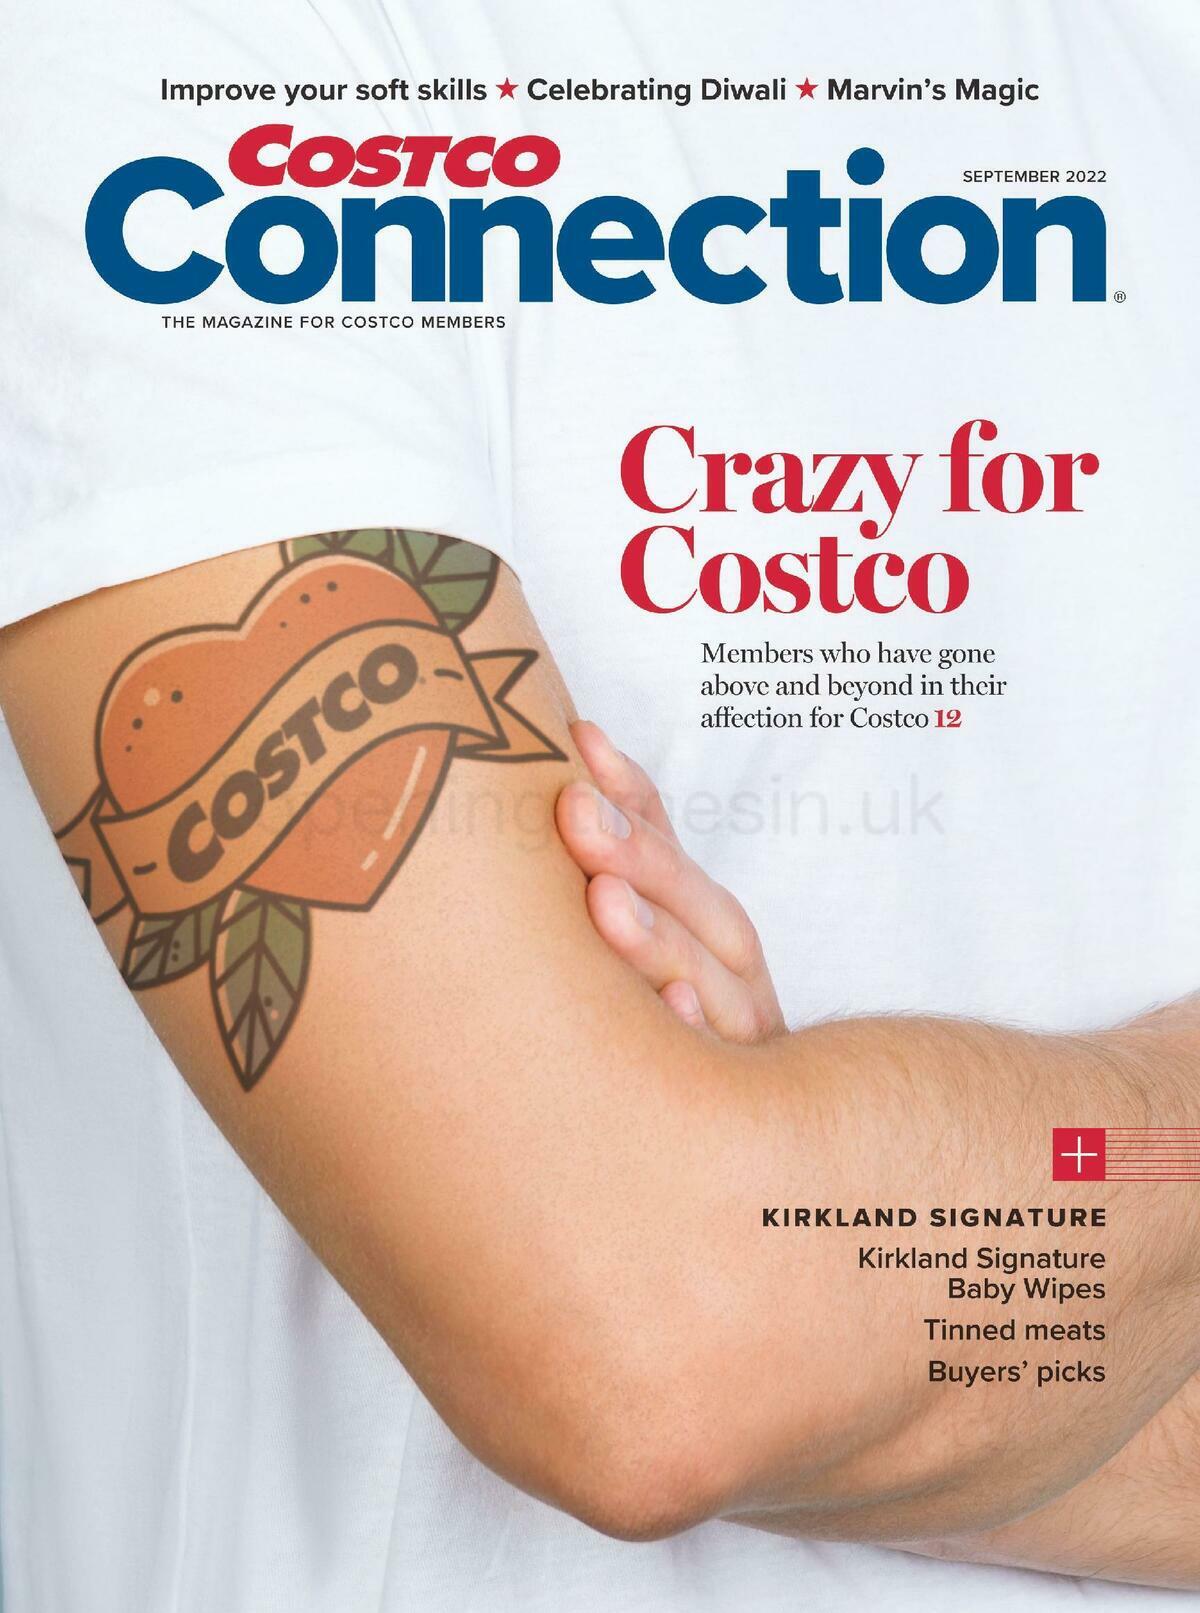 Costco Connection September Offers from 1 September